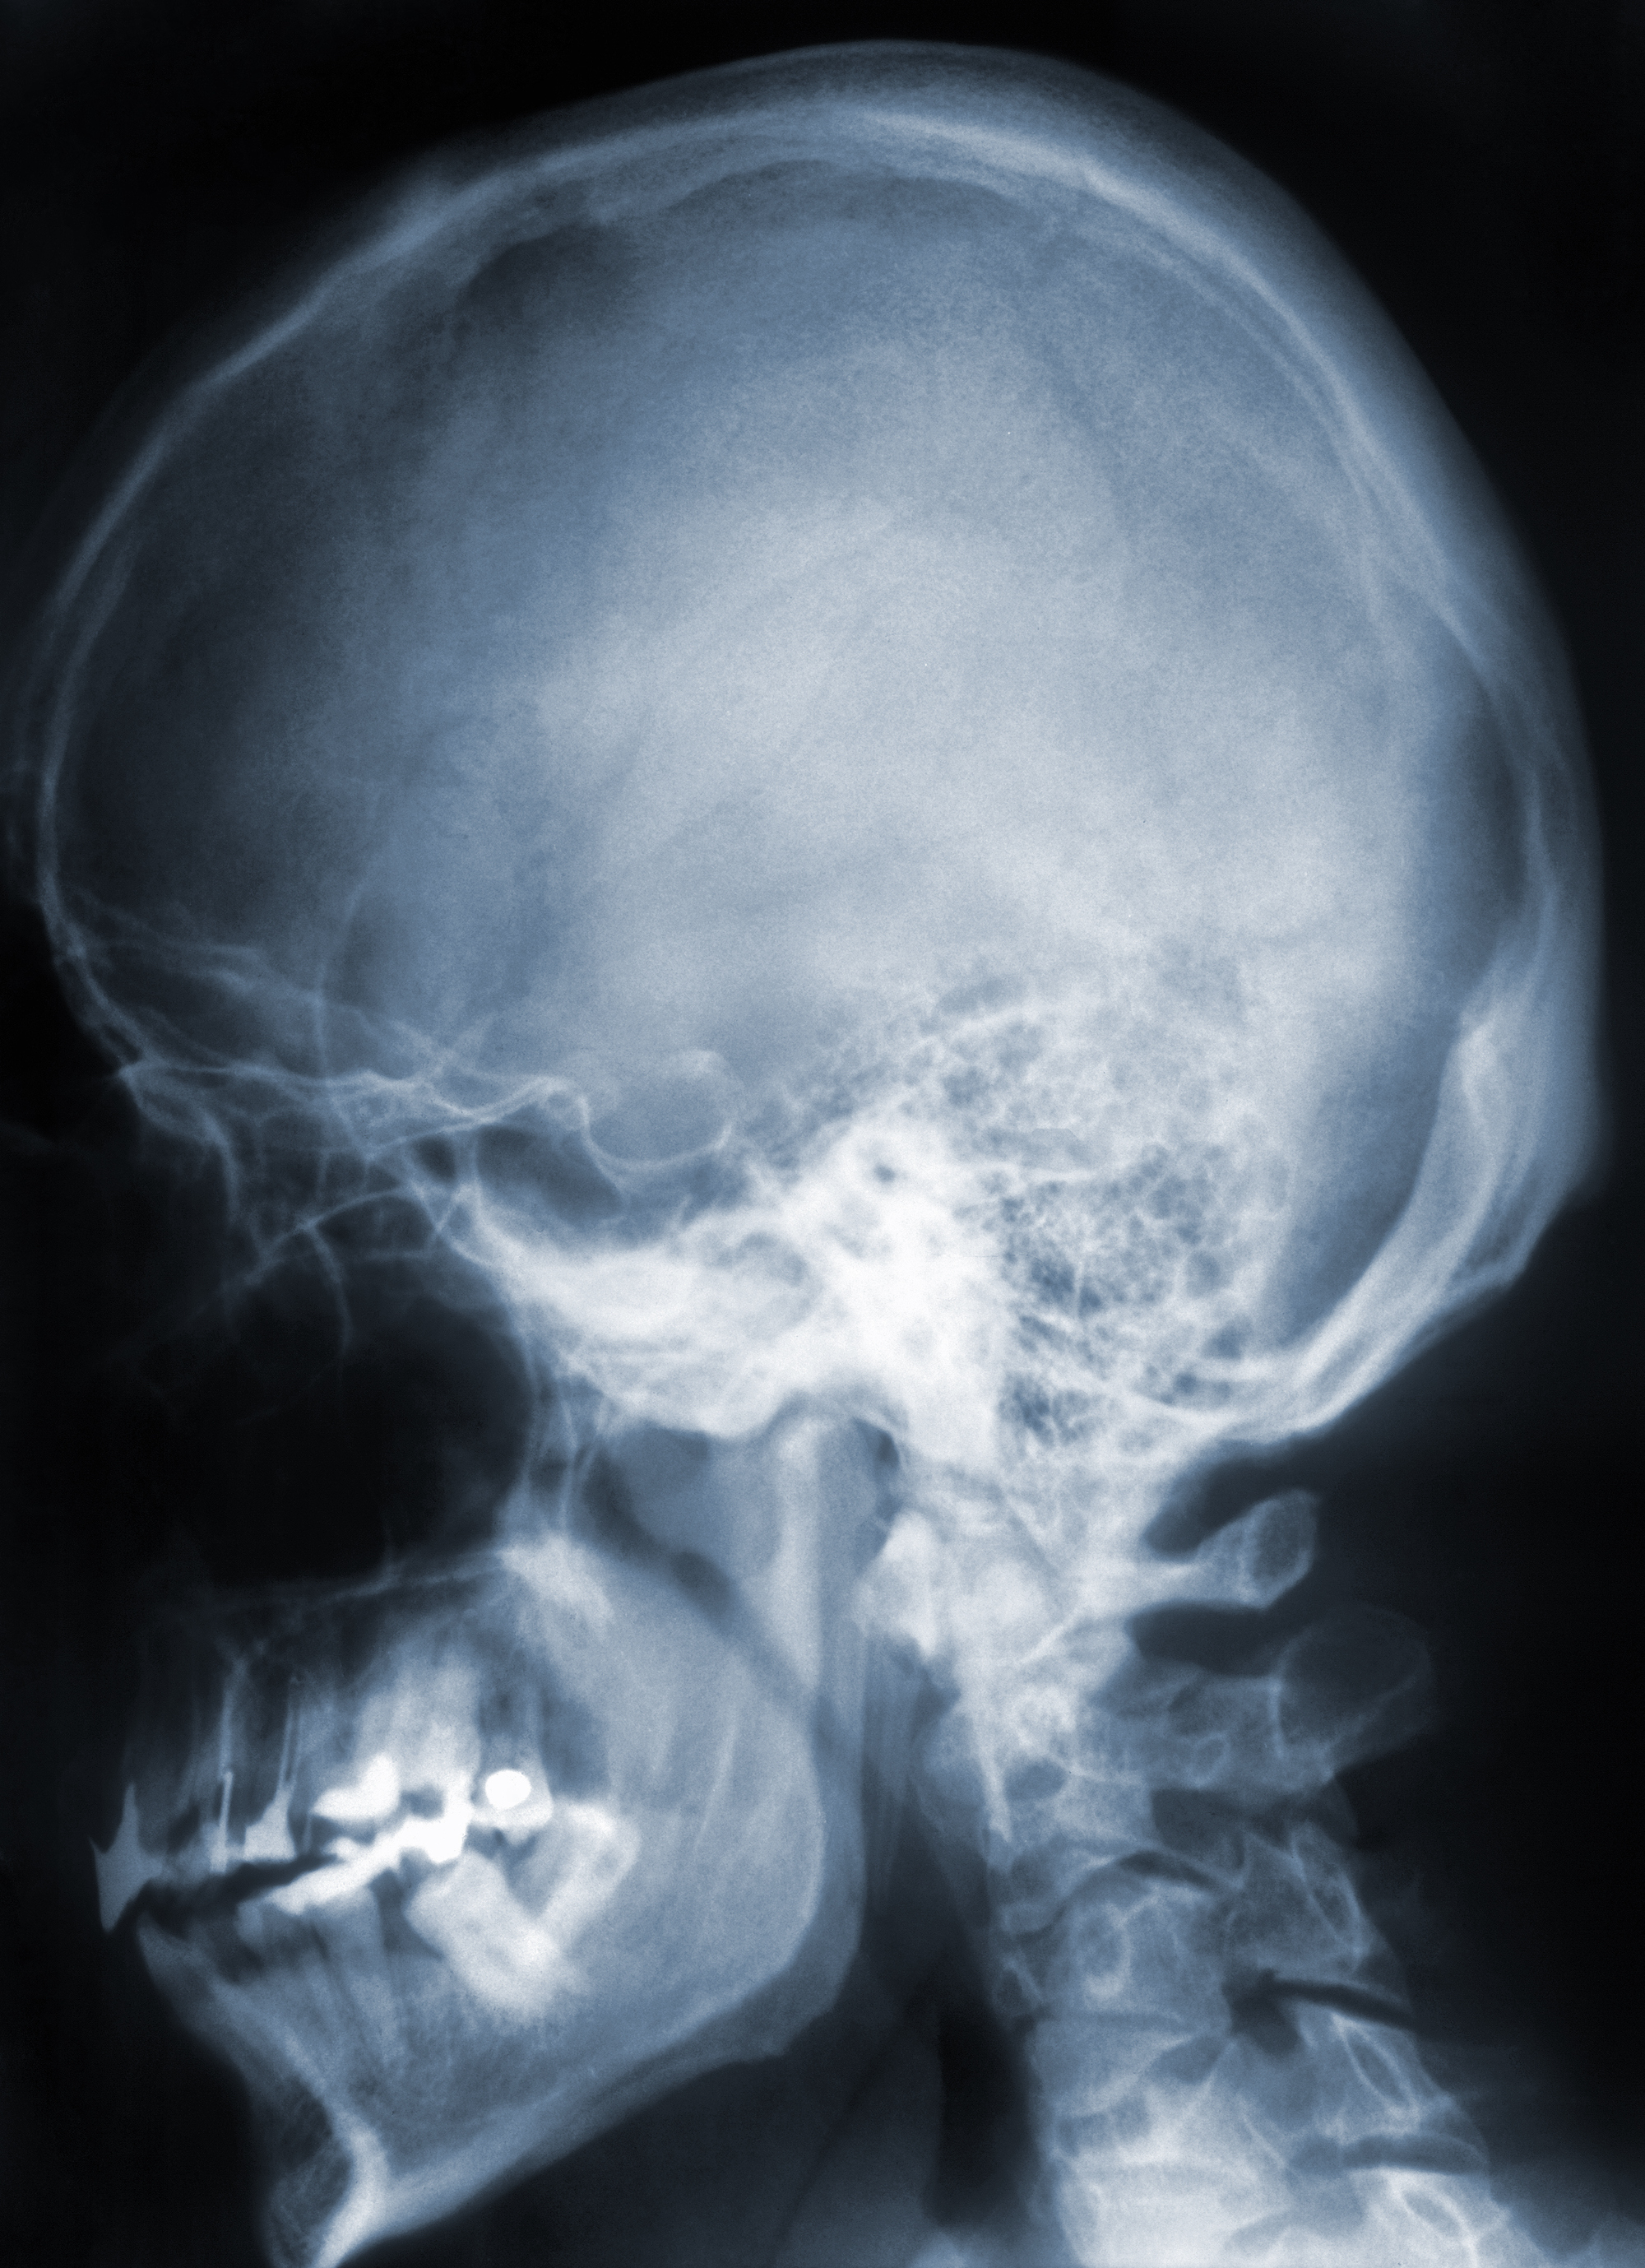 X-ray image of skull, brain and cervical spine, blue toned.